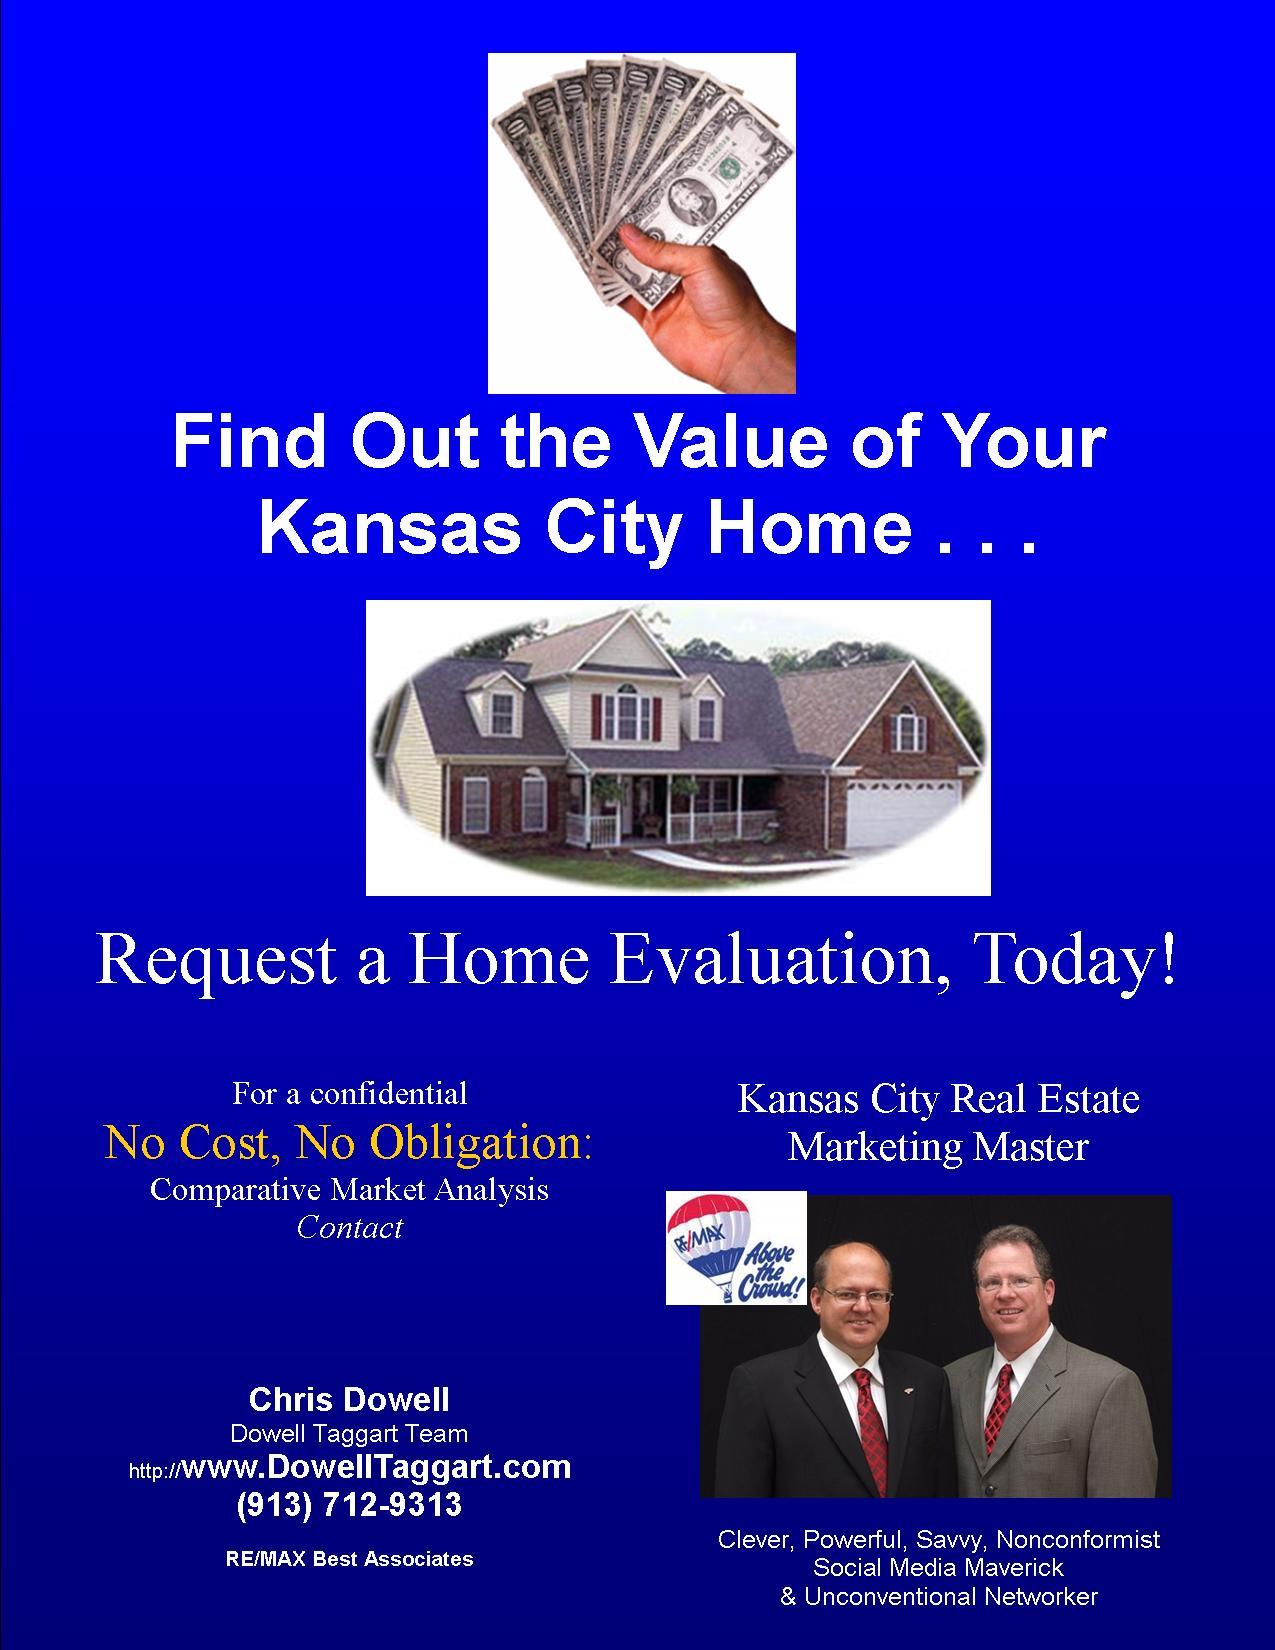 Find out the value of your Kansas City home